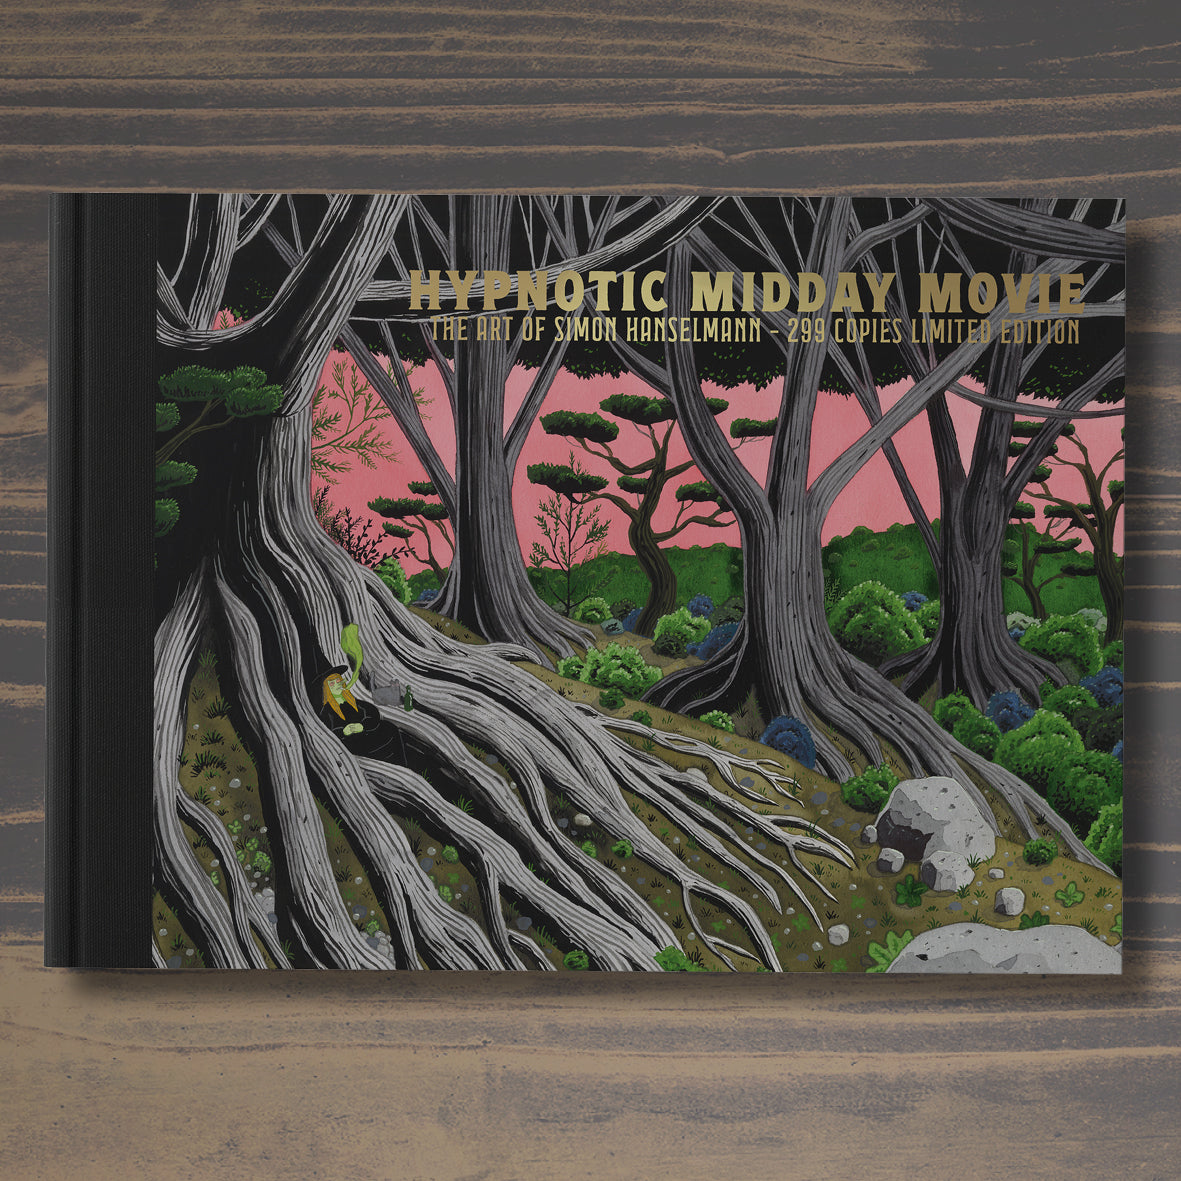 299 Copies Limited Edition ( 32 exclusive pages ) - Hypnotic Midday Movie